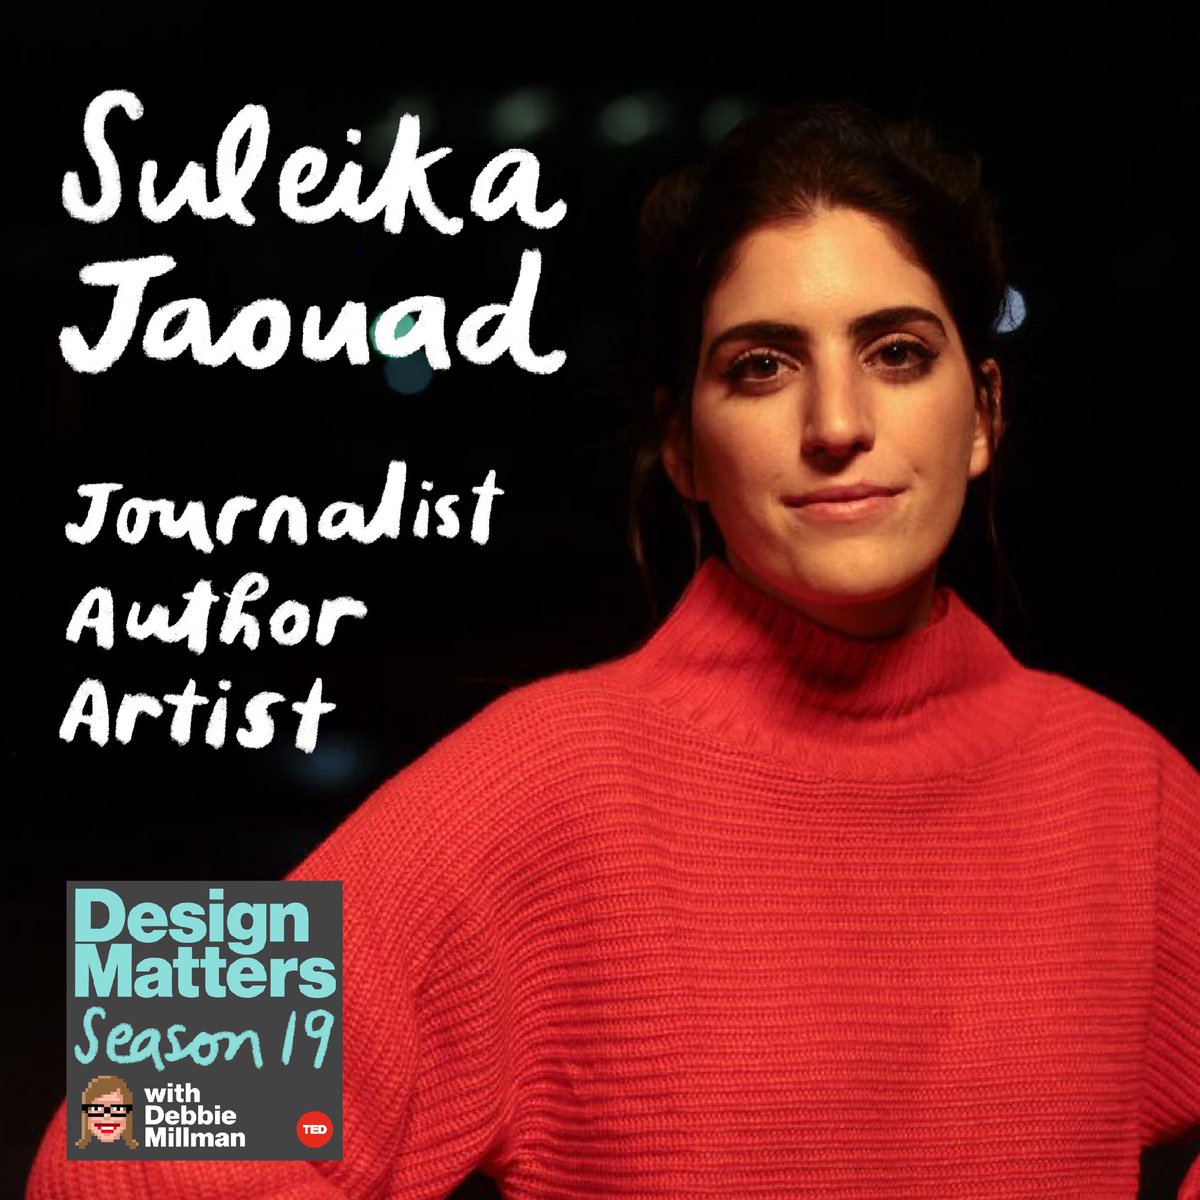 New York Times bestselling author and journalist @suleikajaouad joins @debbiemillman this week on #DesignMatters to discuss her remarkable life, career, and bestselling memoir, Between Two Kingdoms. Listen now ▶️ soundcloud.com/designmatters/…